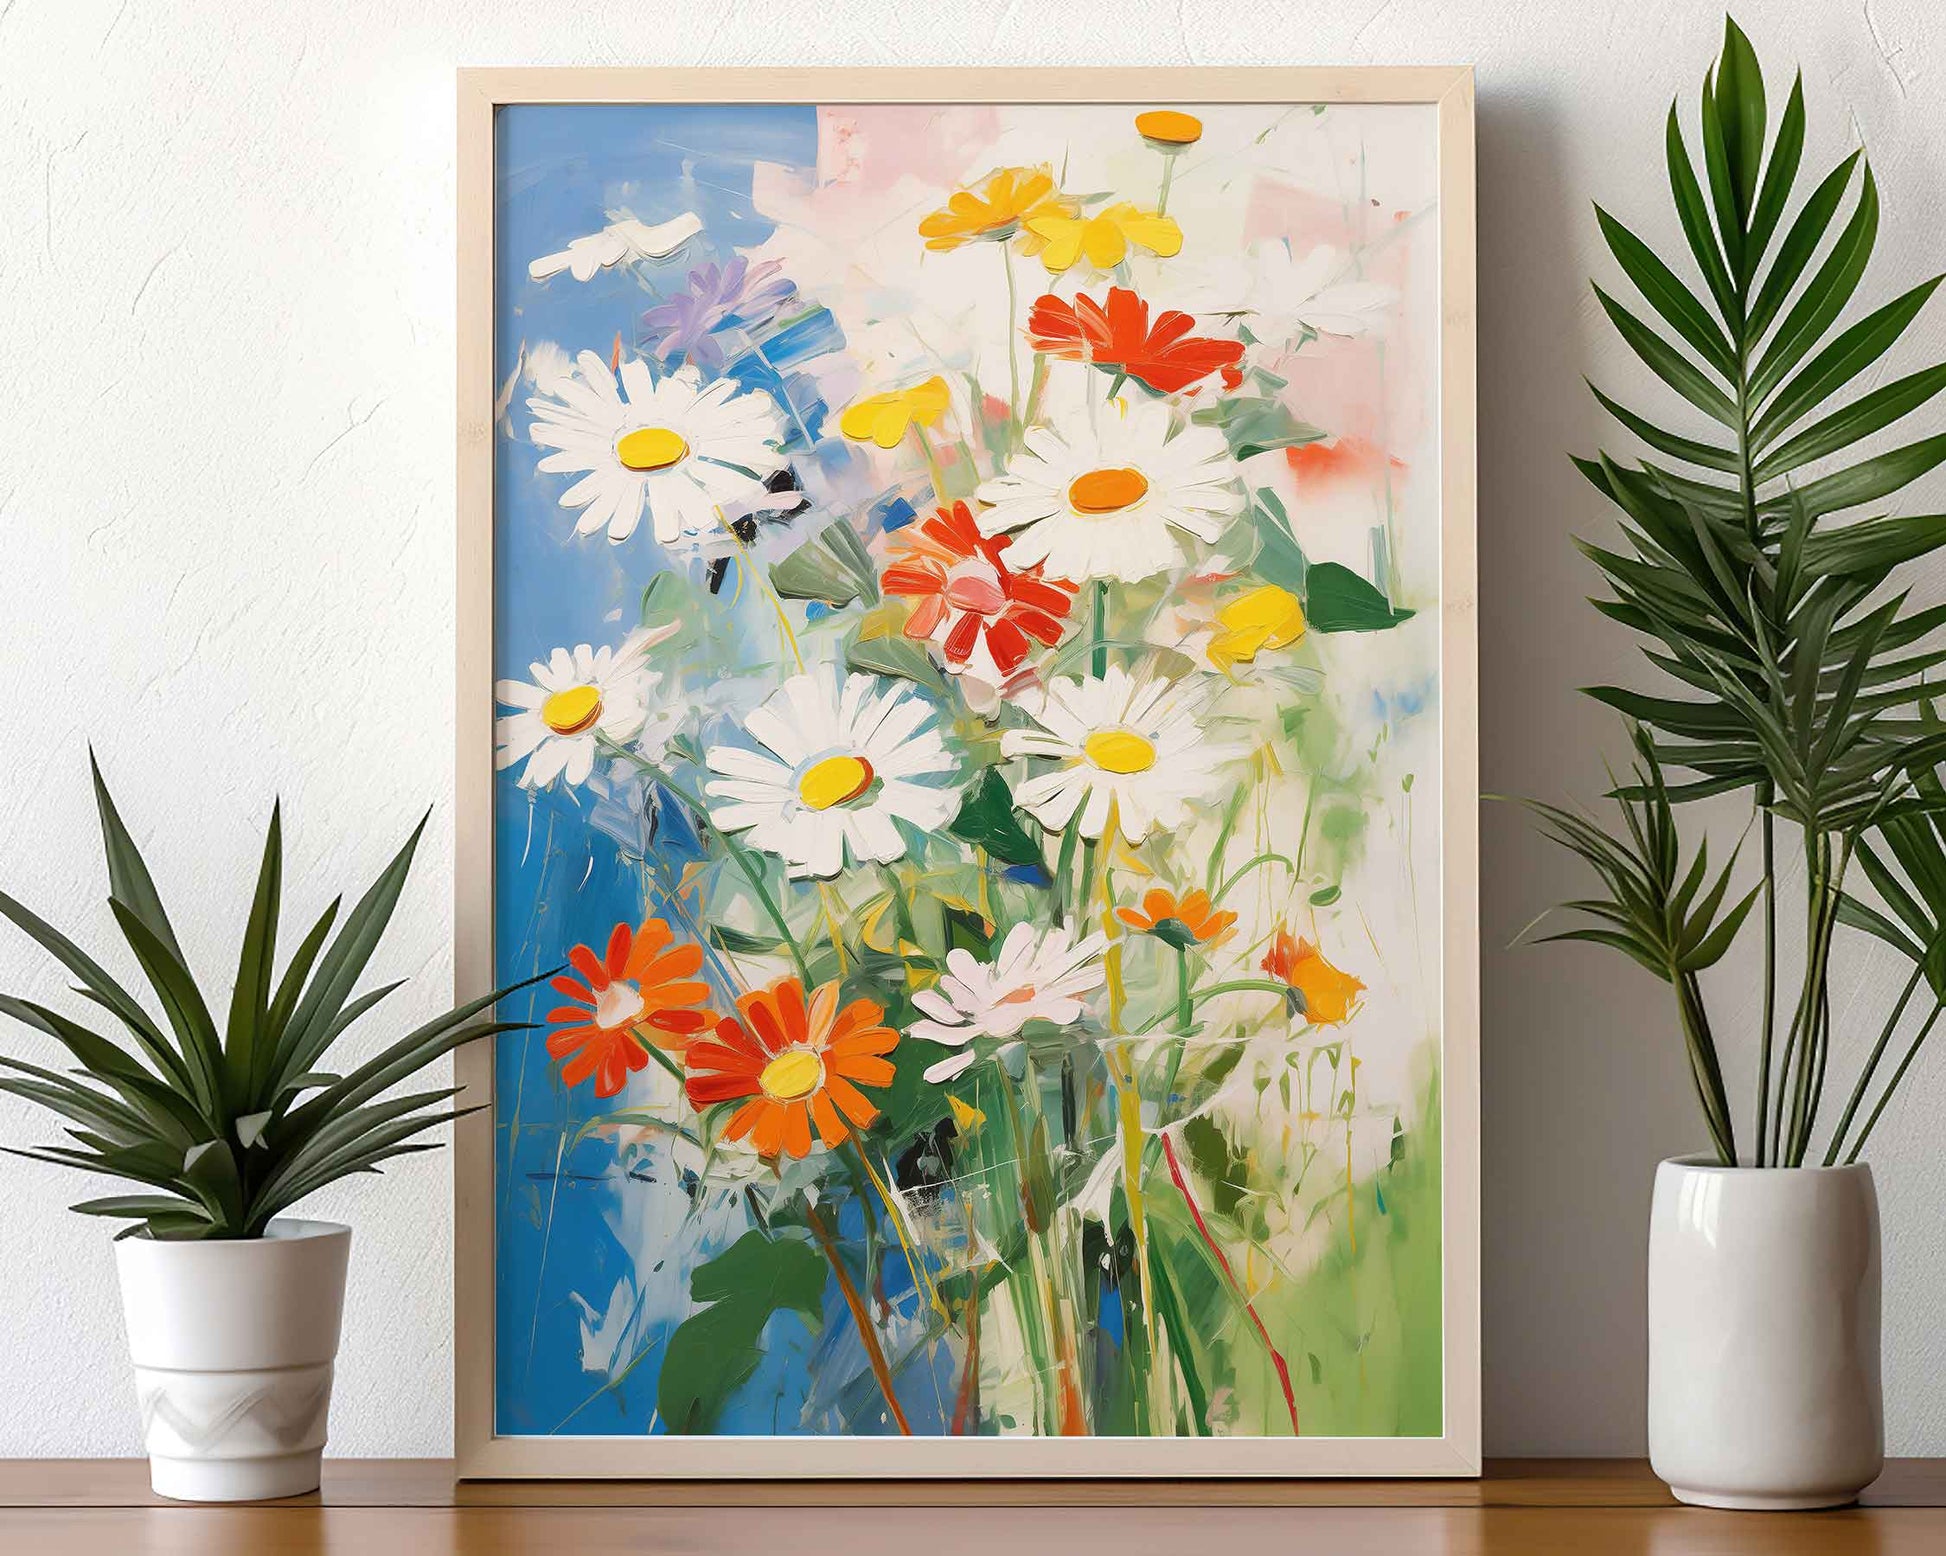 Framed Image of Abstract Expressionist Daisies Wall Art Print Poster